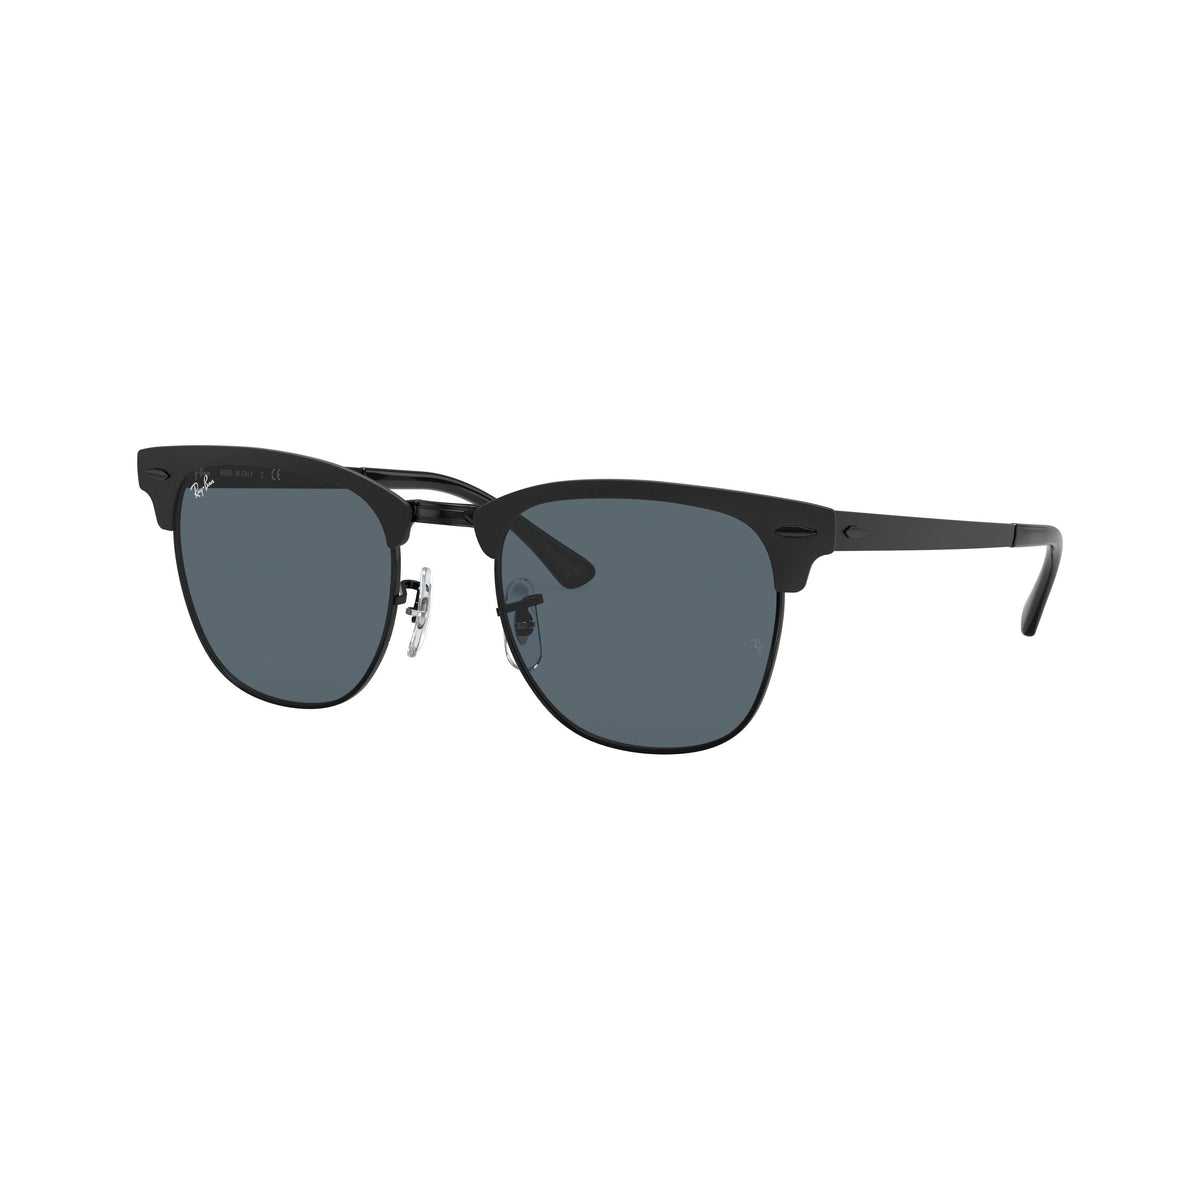 Ray-Ban RB3716 Clubmaster Metal Sunglasses